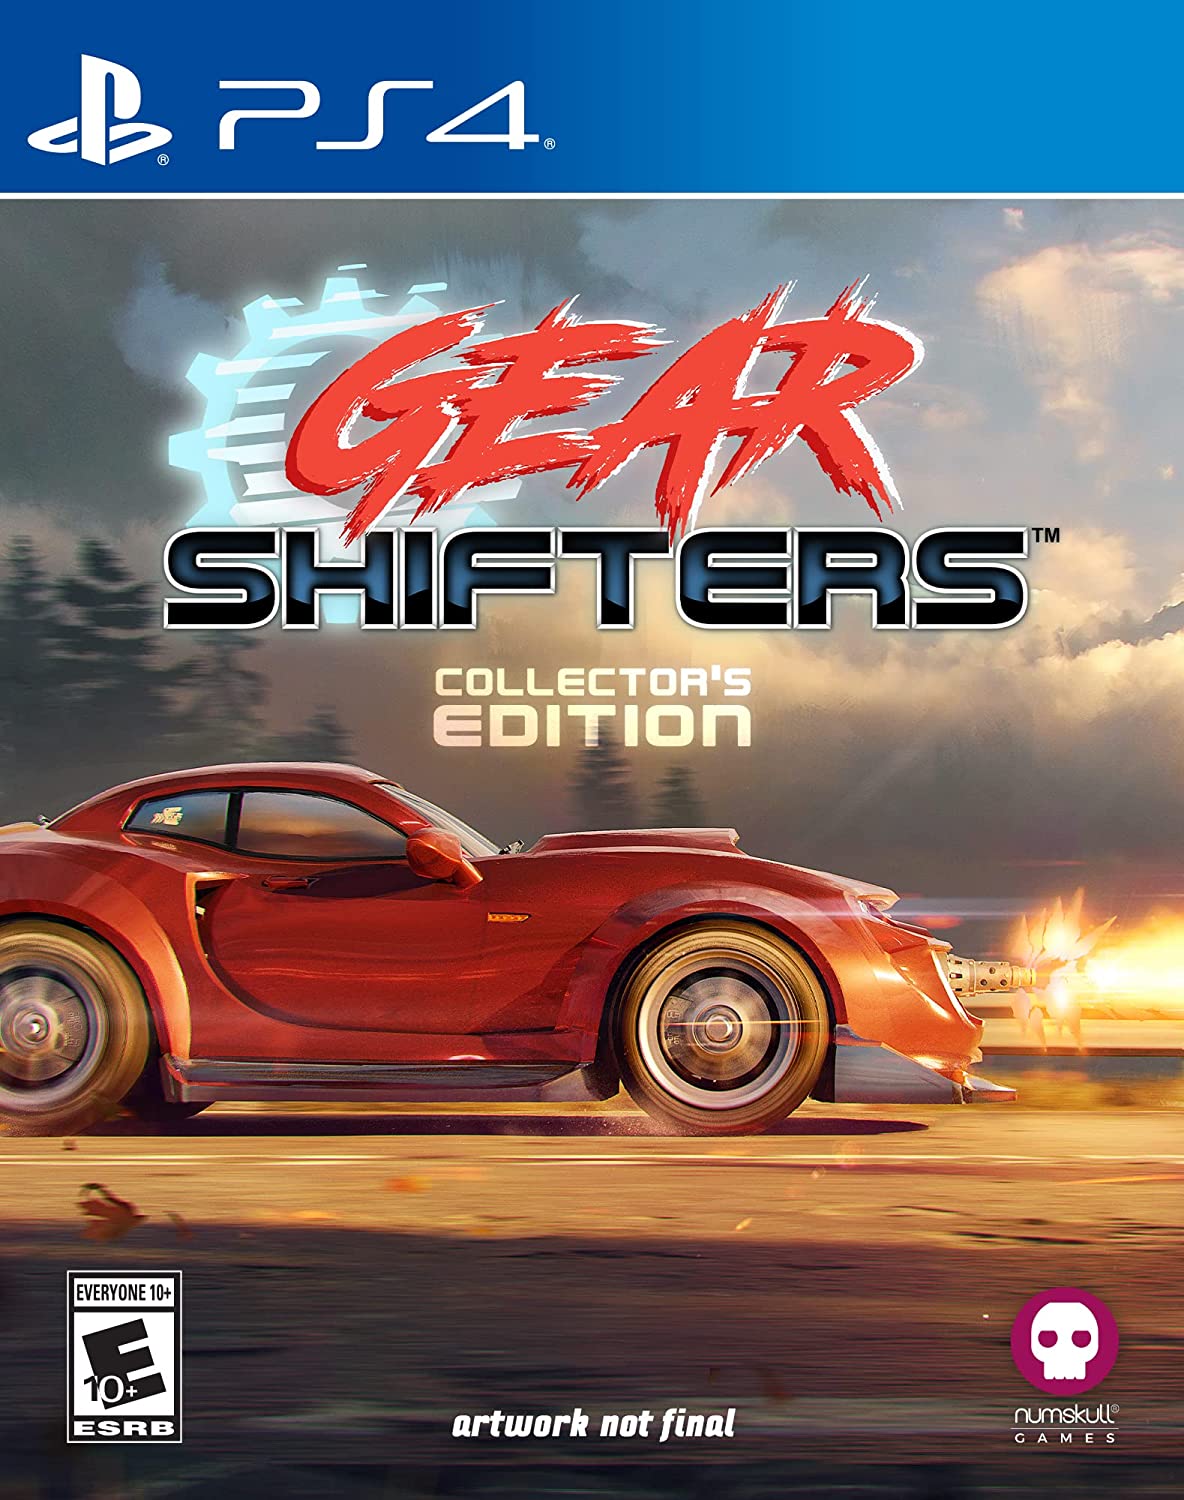 Gearshifters Collector S Edition Nintendo Switch